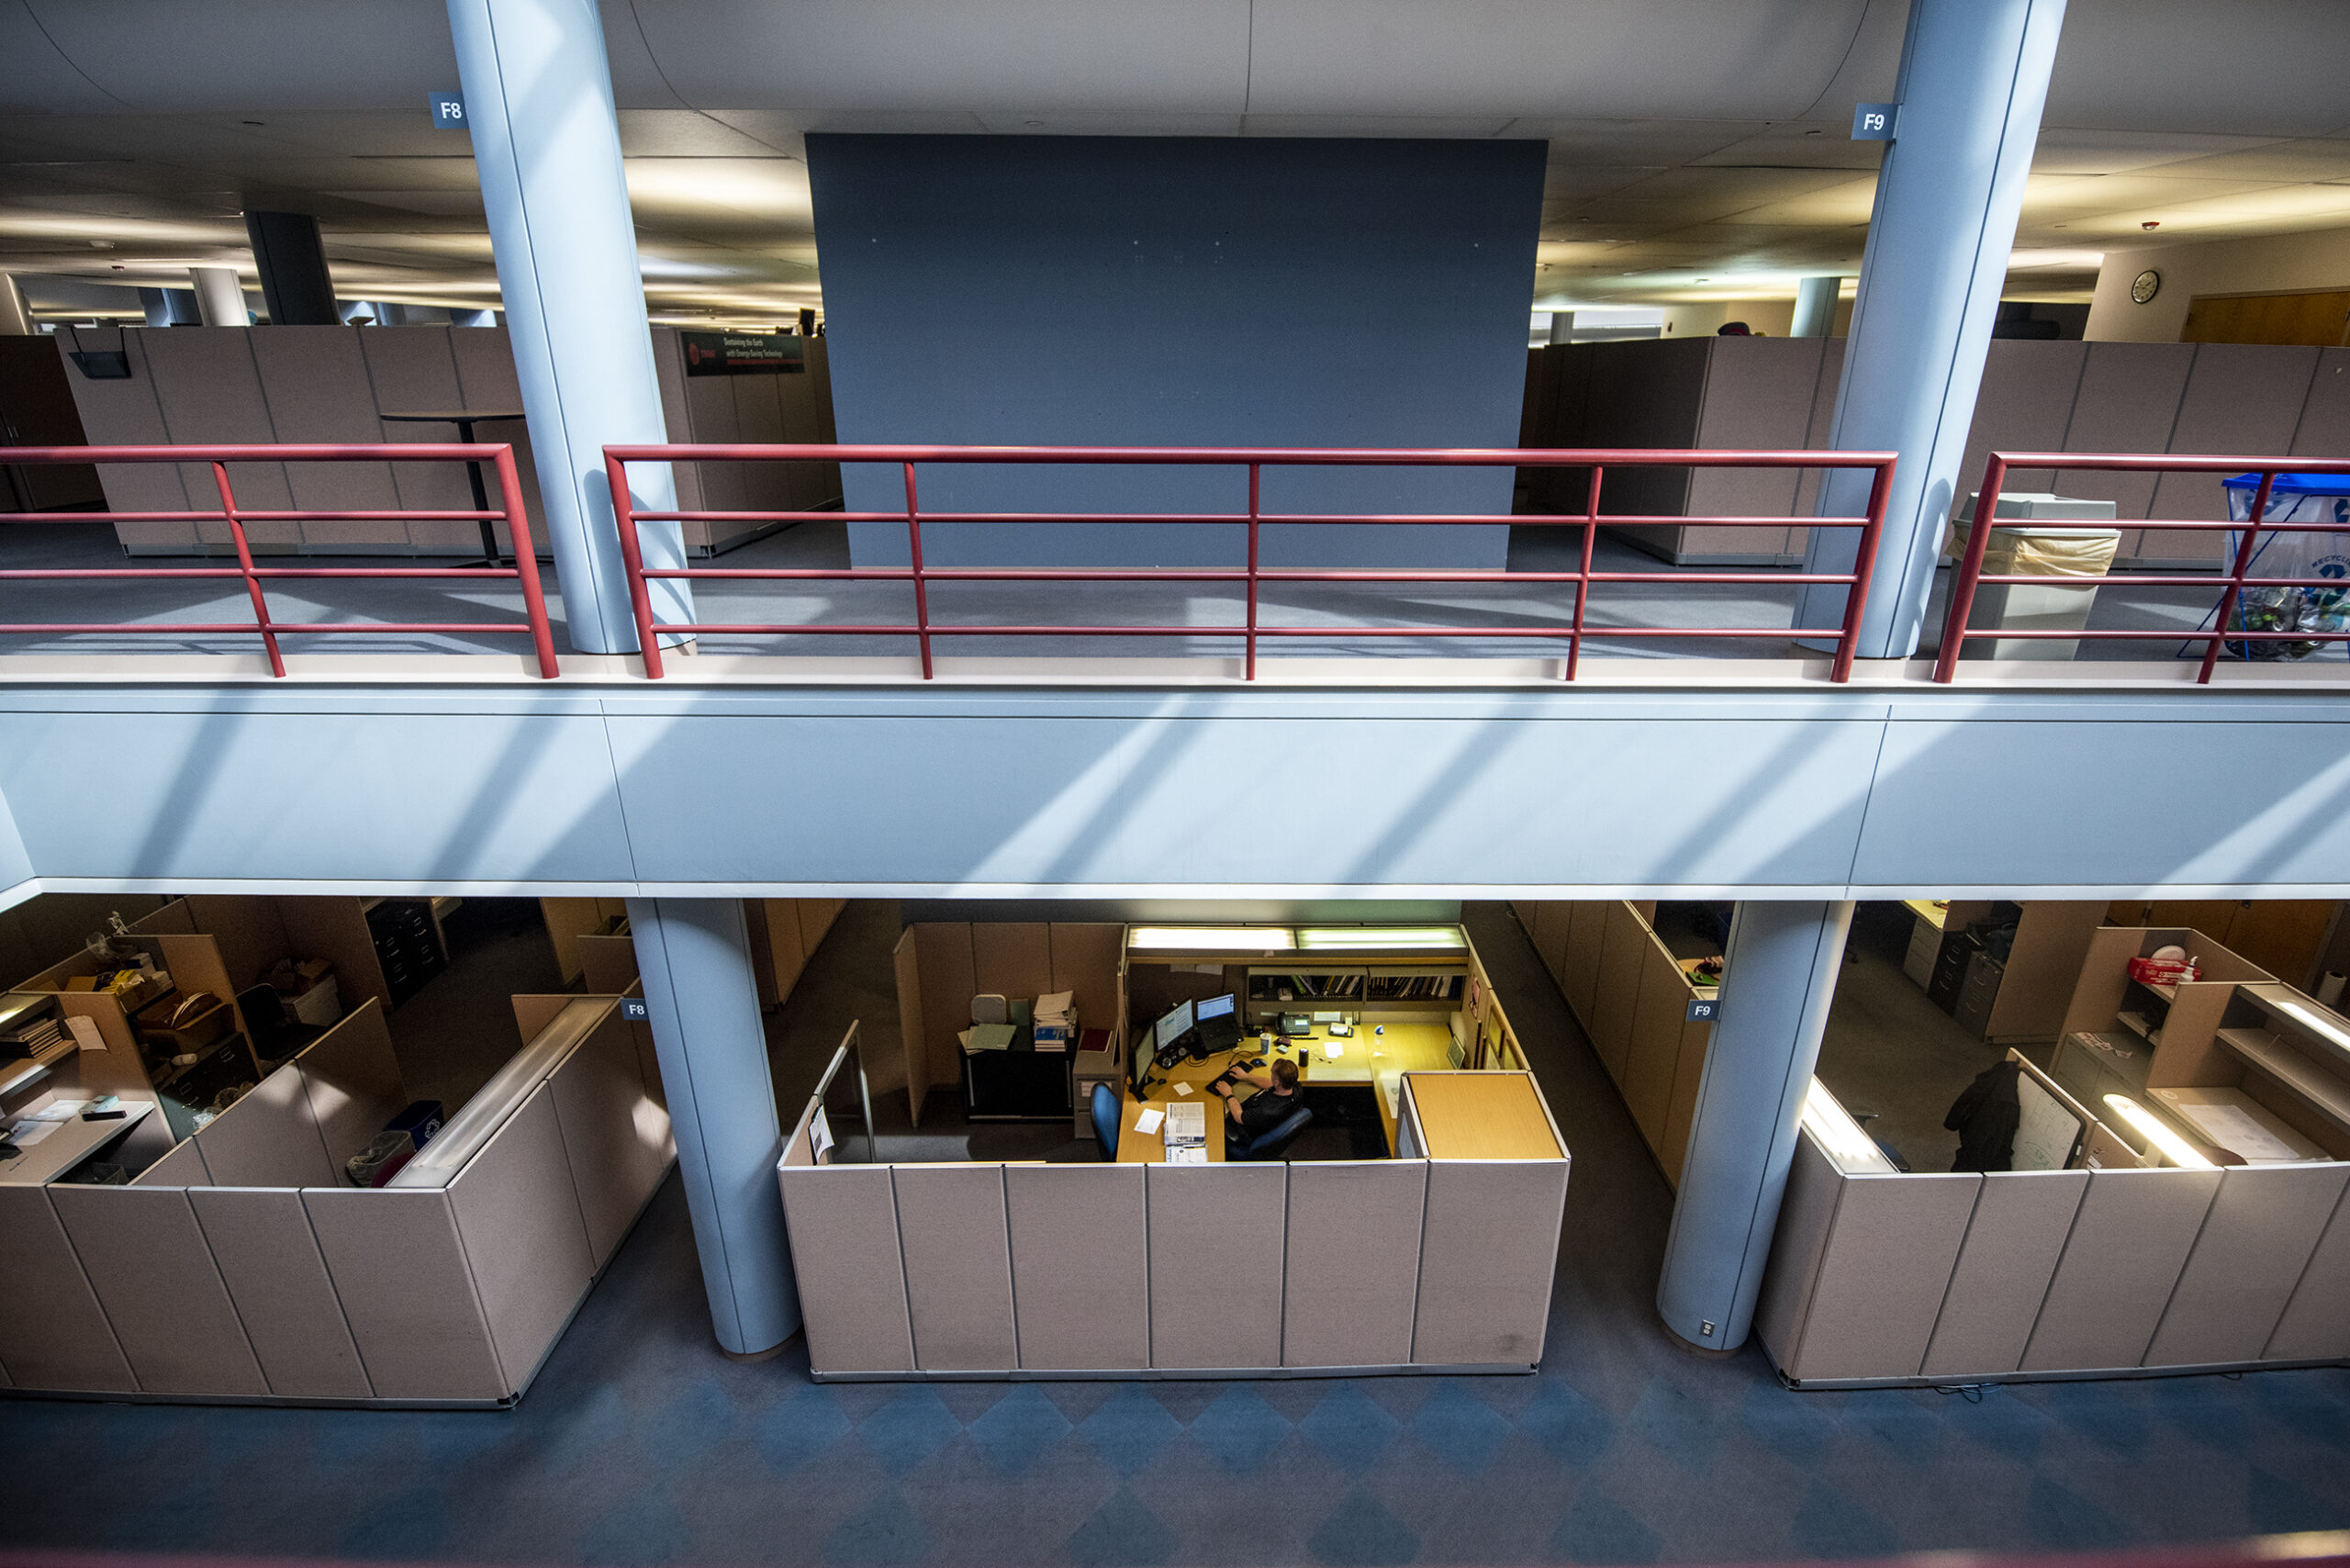 Three cubicles can be seen from an upper floor.